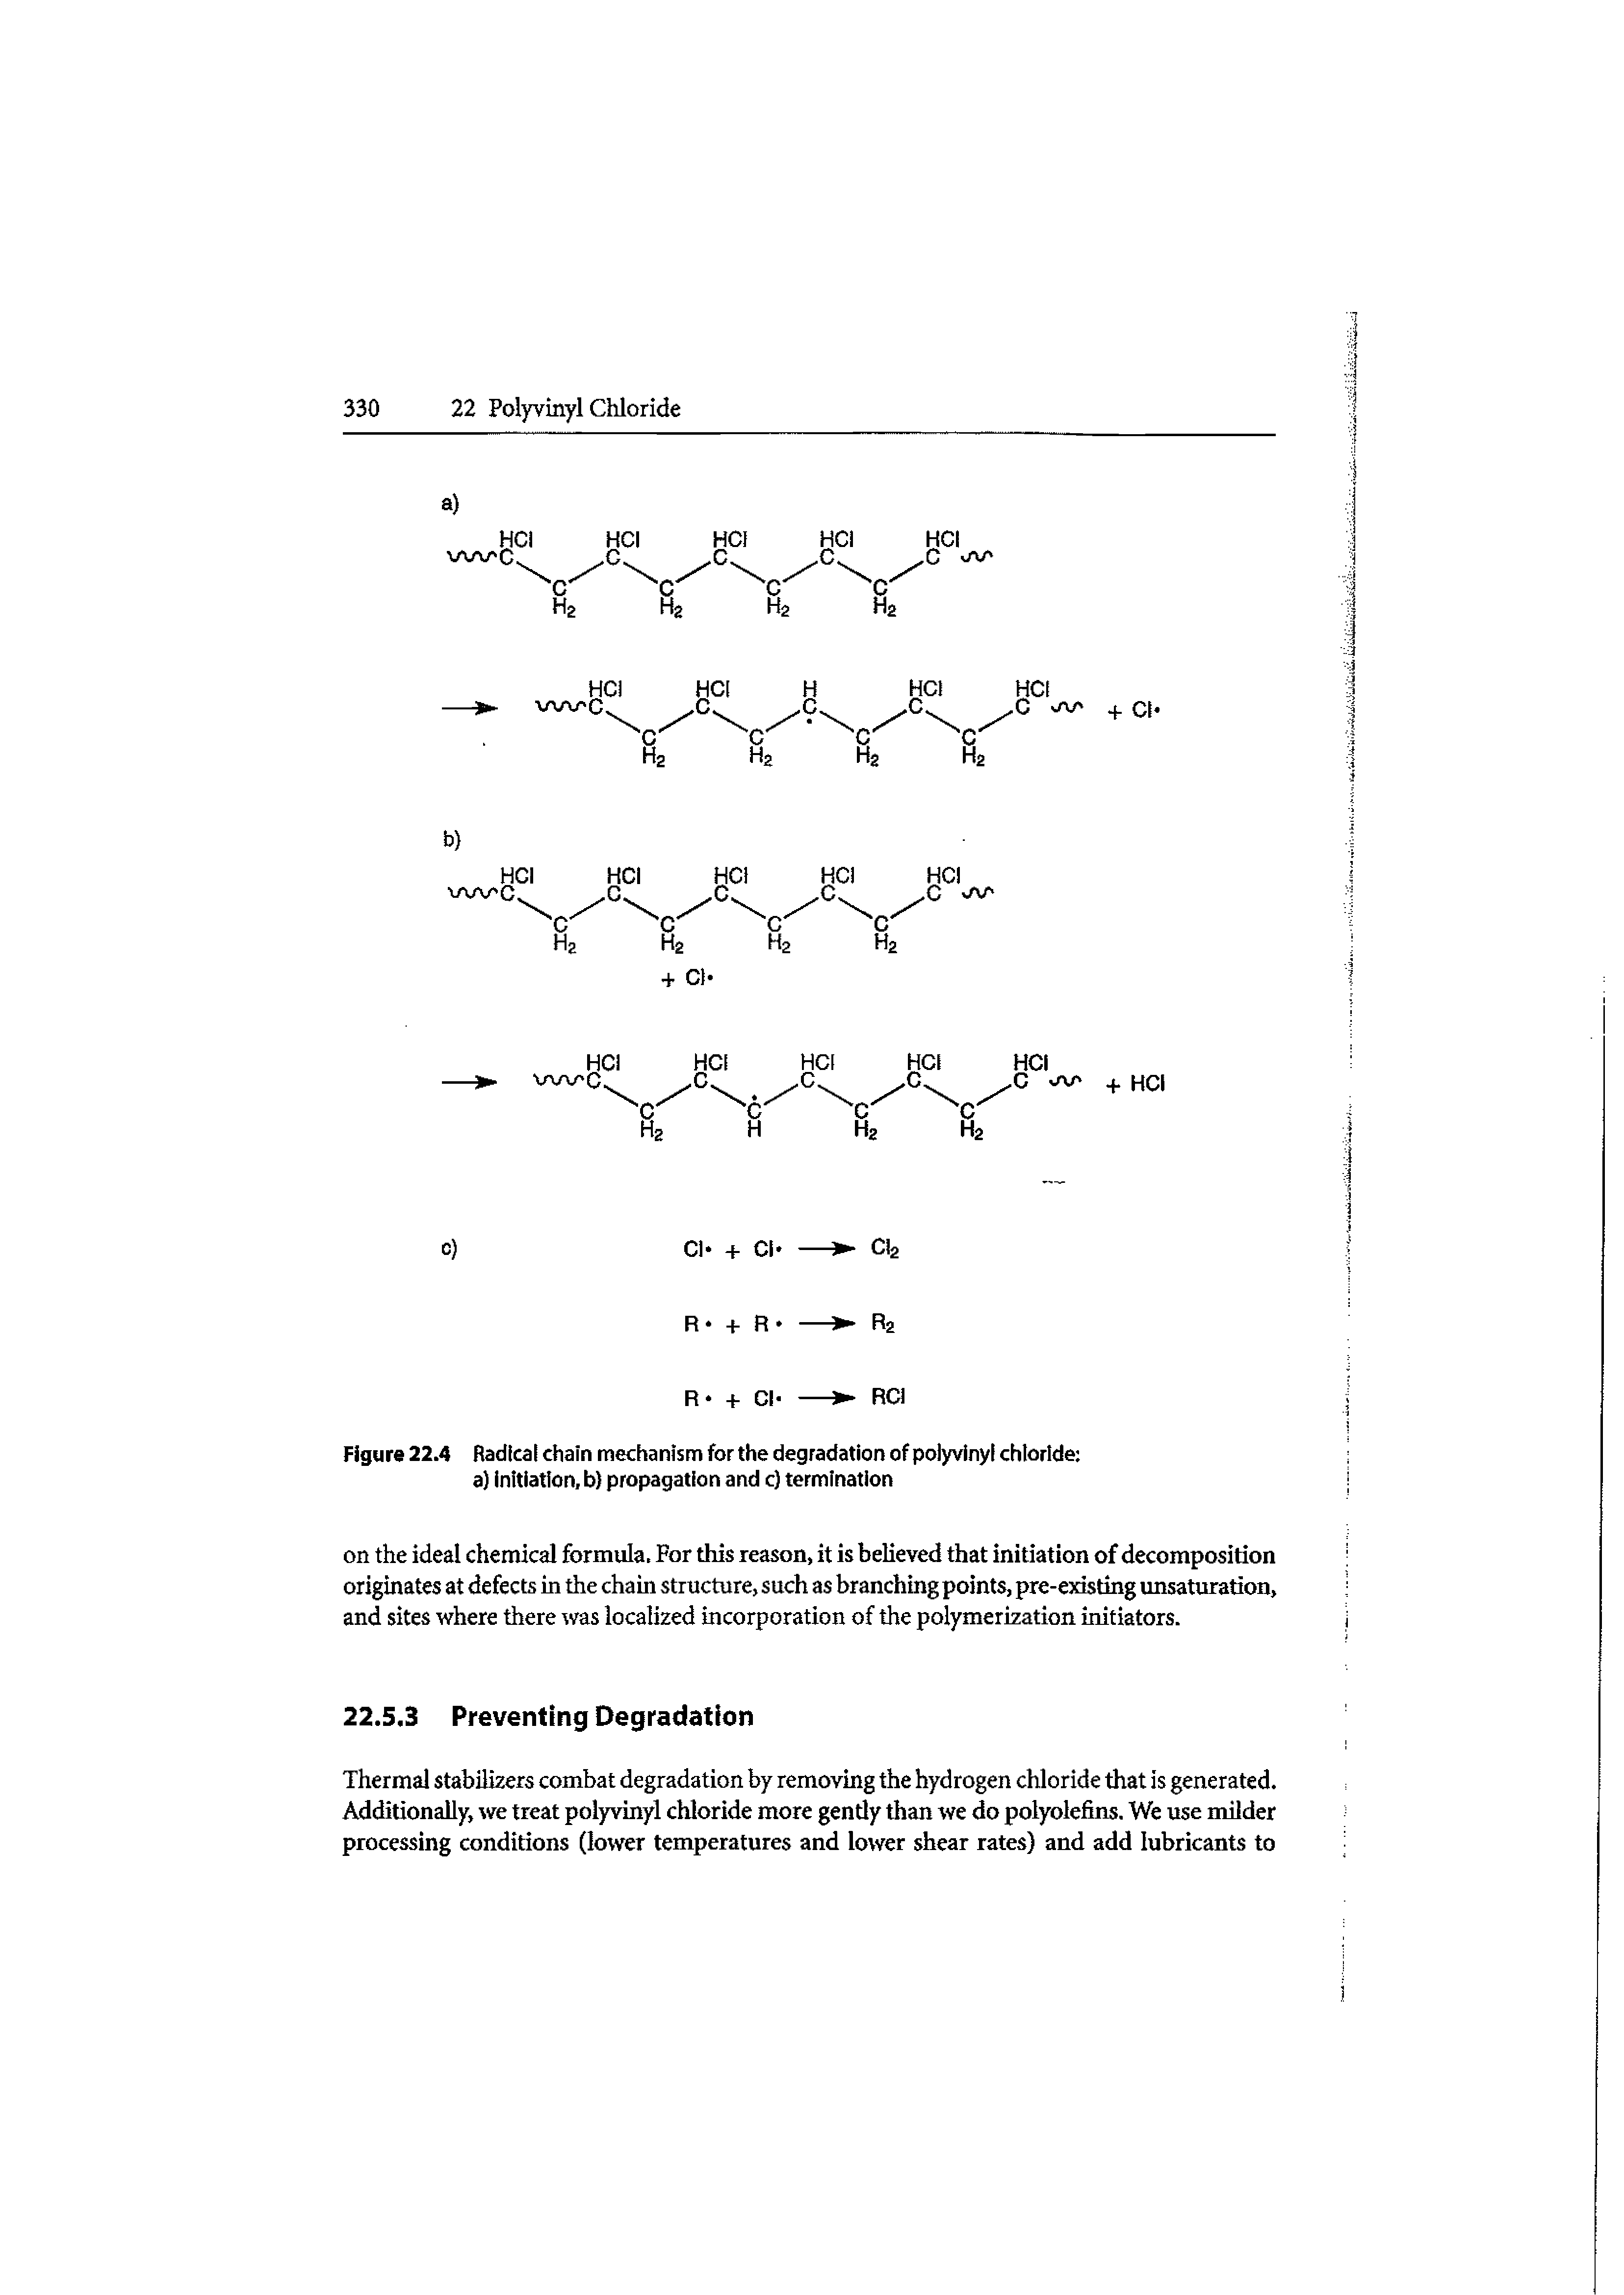 Figure 22.4 Radical chain mechanism for the degradation of polyvinyl chloride a) initiation, b propagation and c) termination...